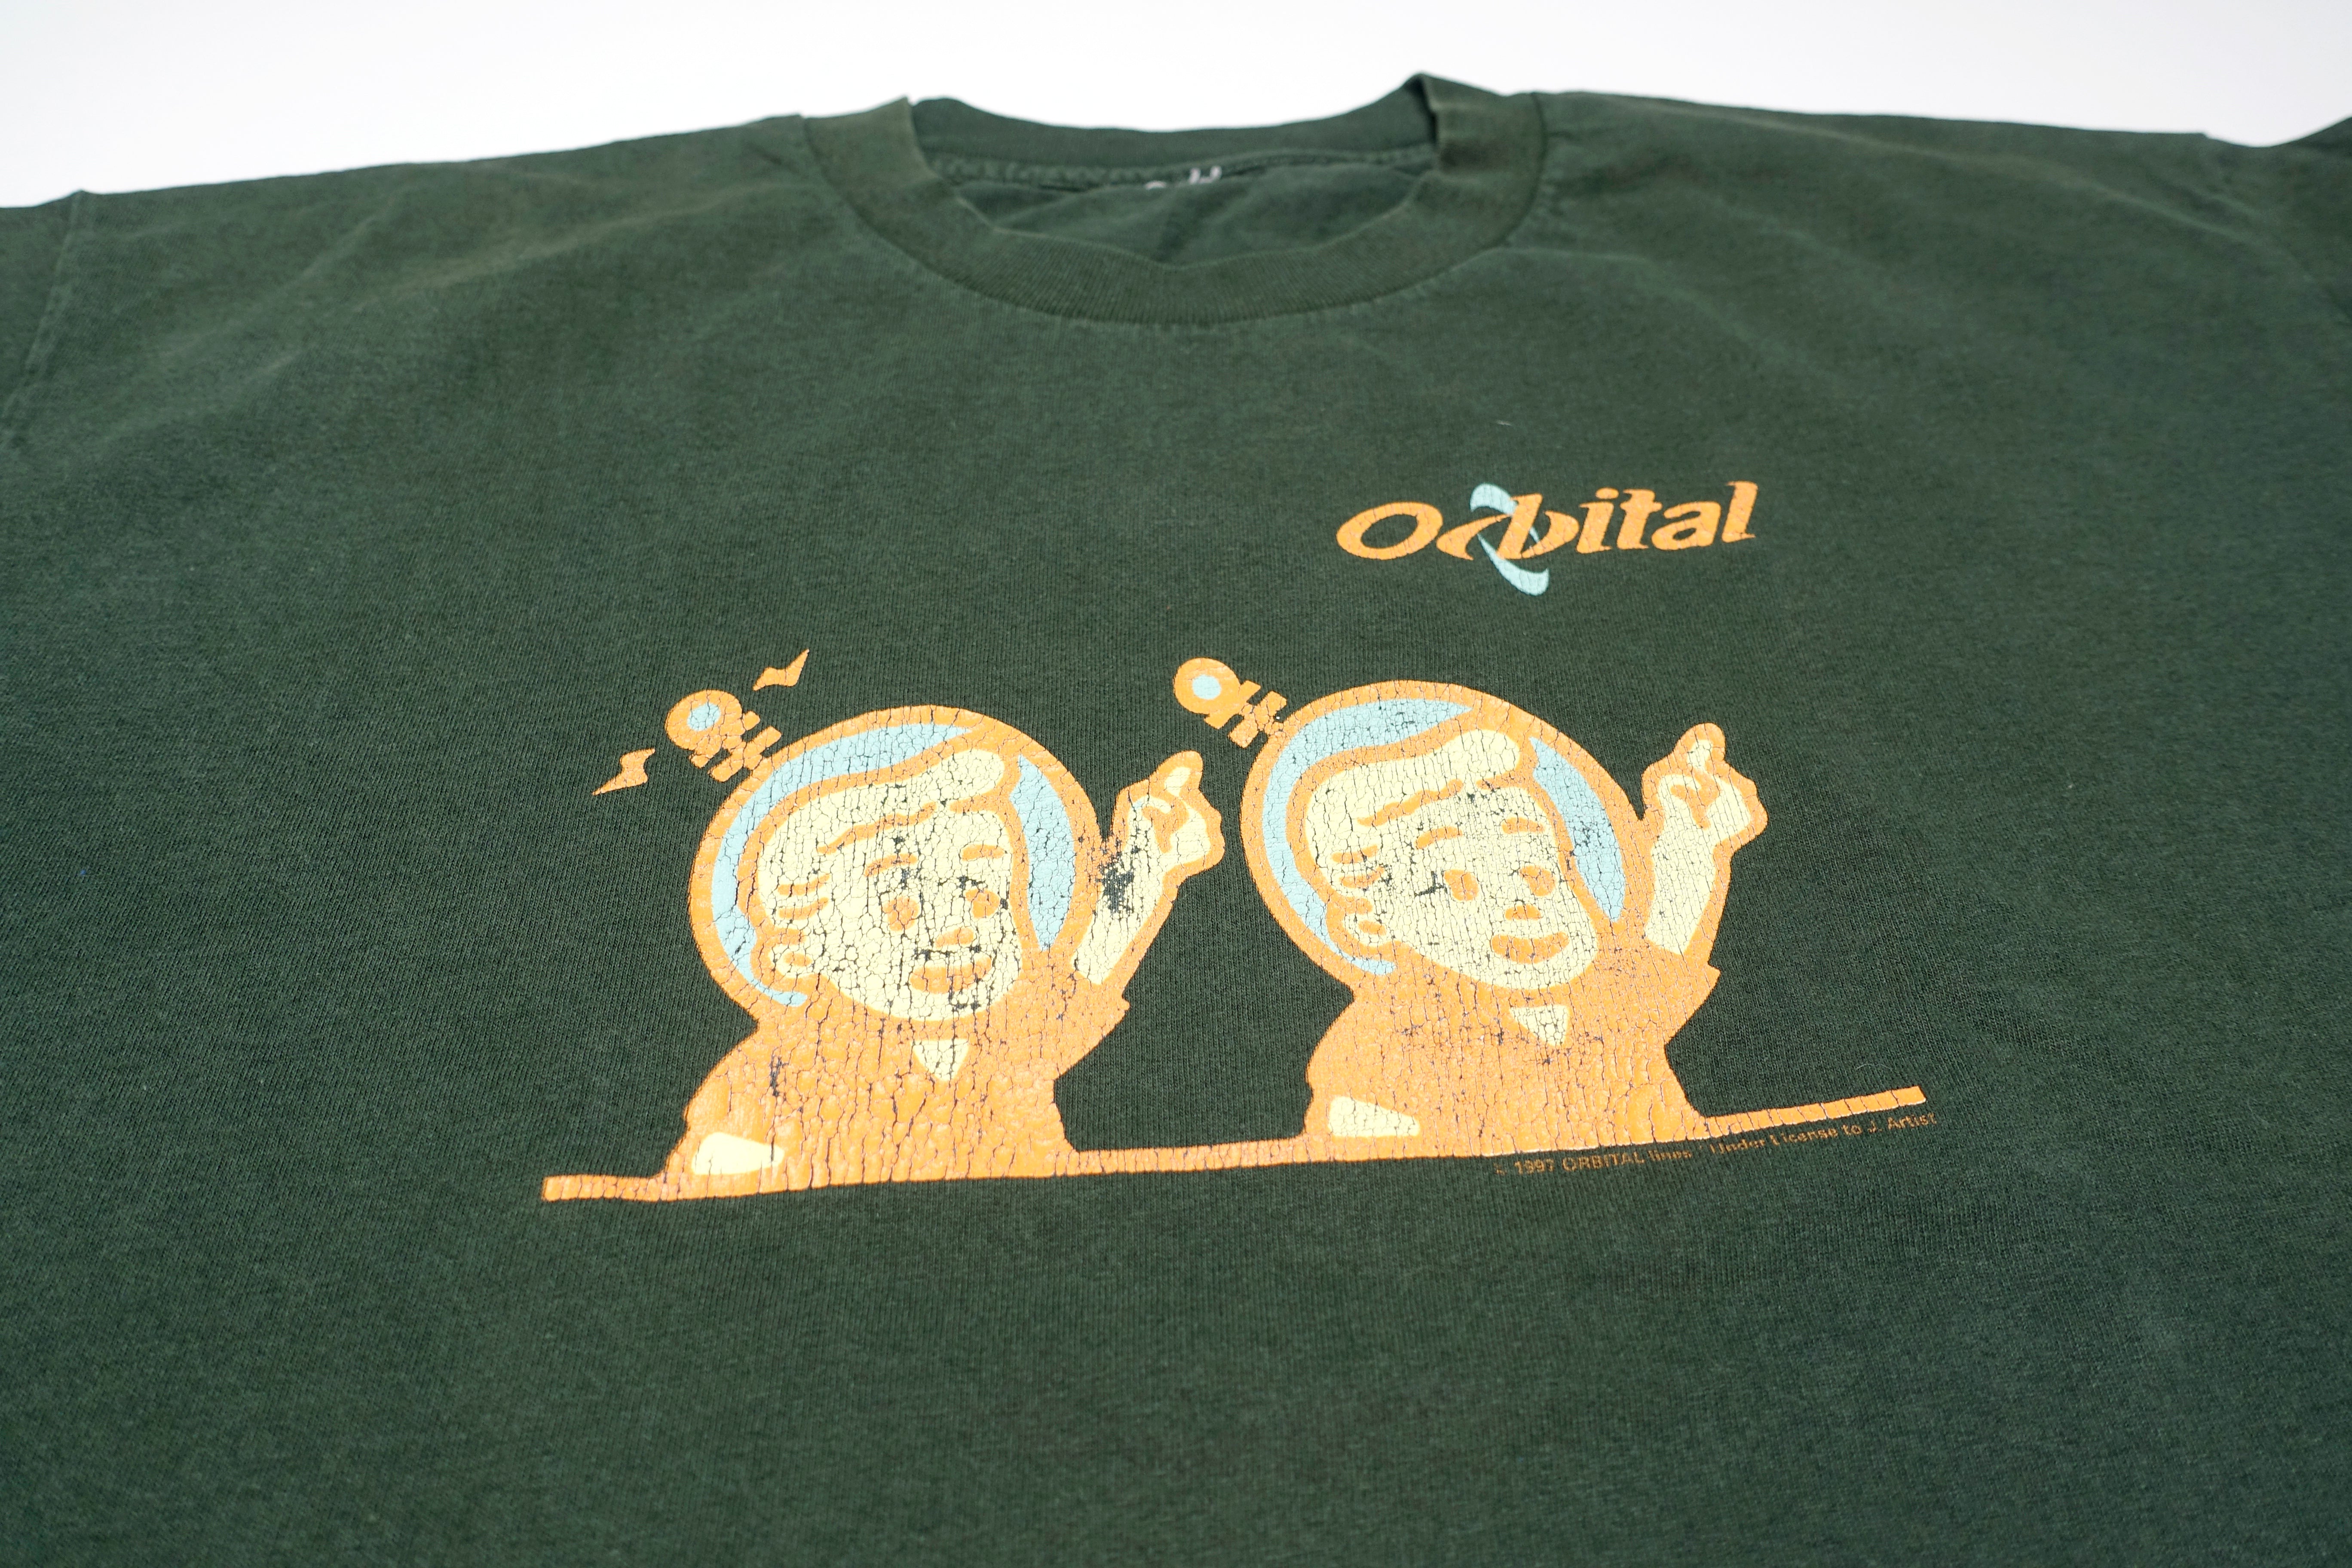 Orbital - Are We Here? / Space Kids 1997 Tour Shirt Size XL